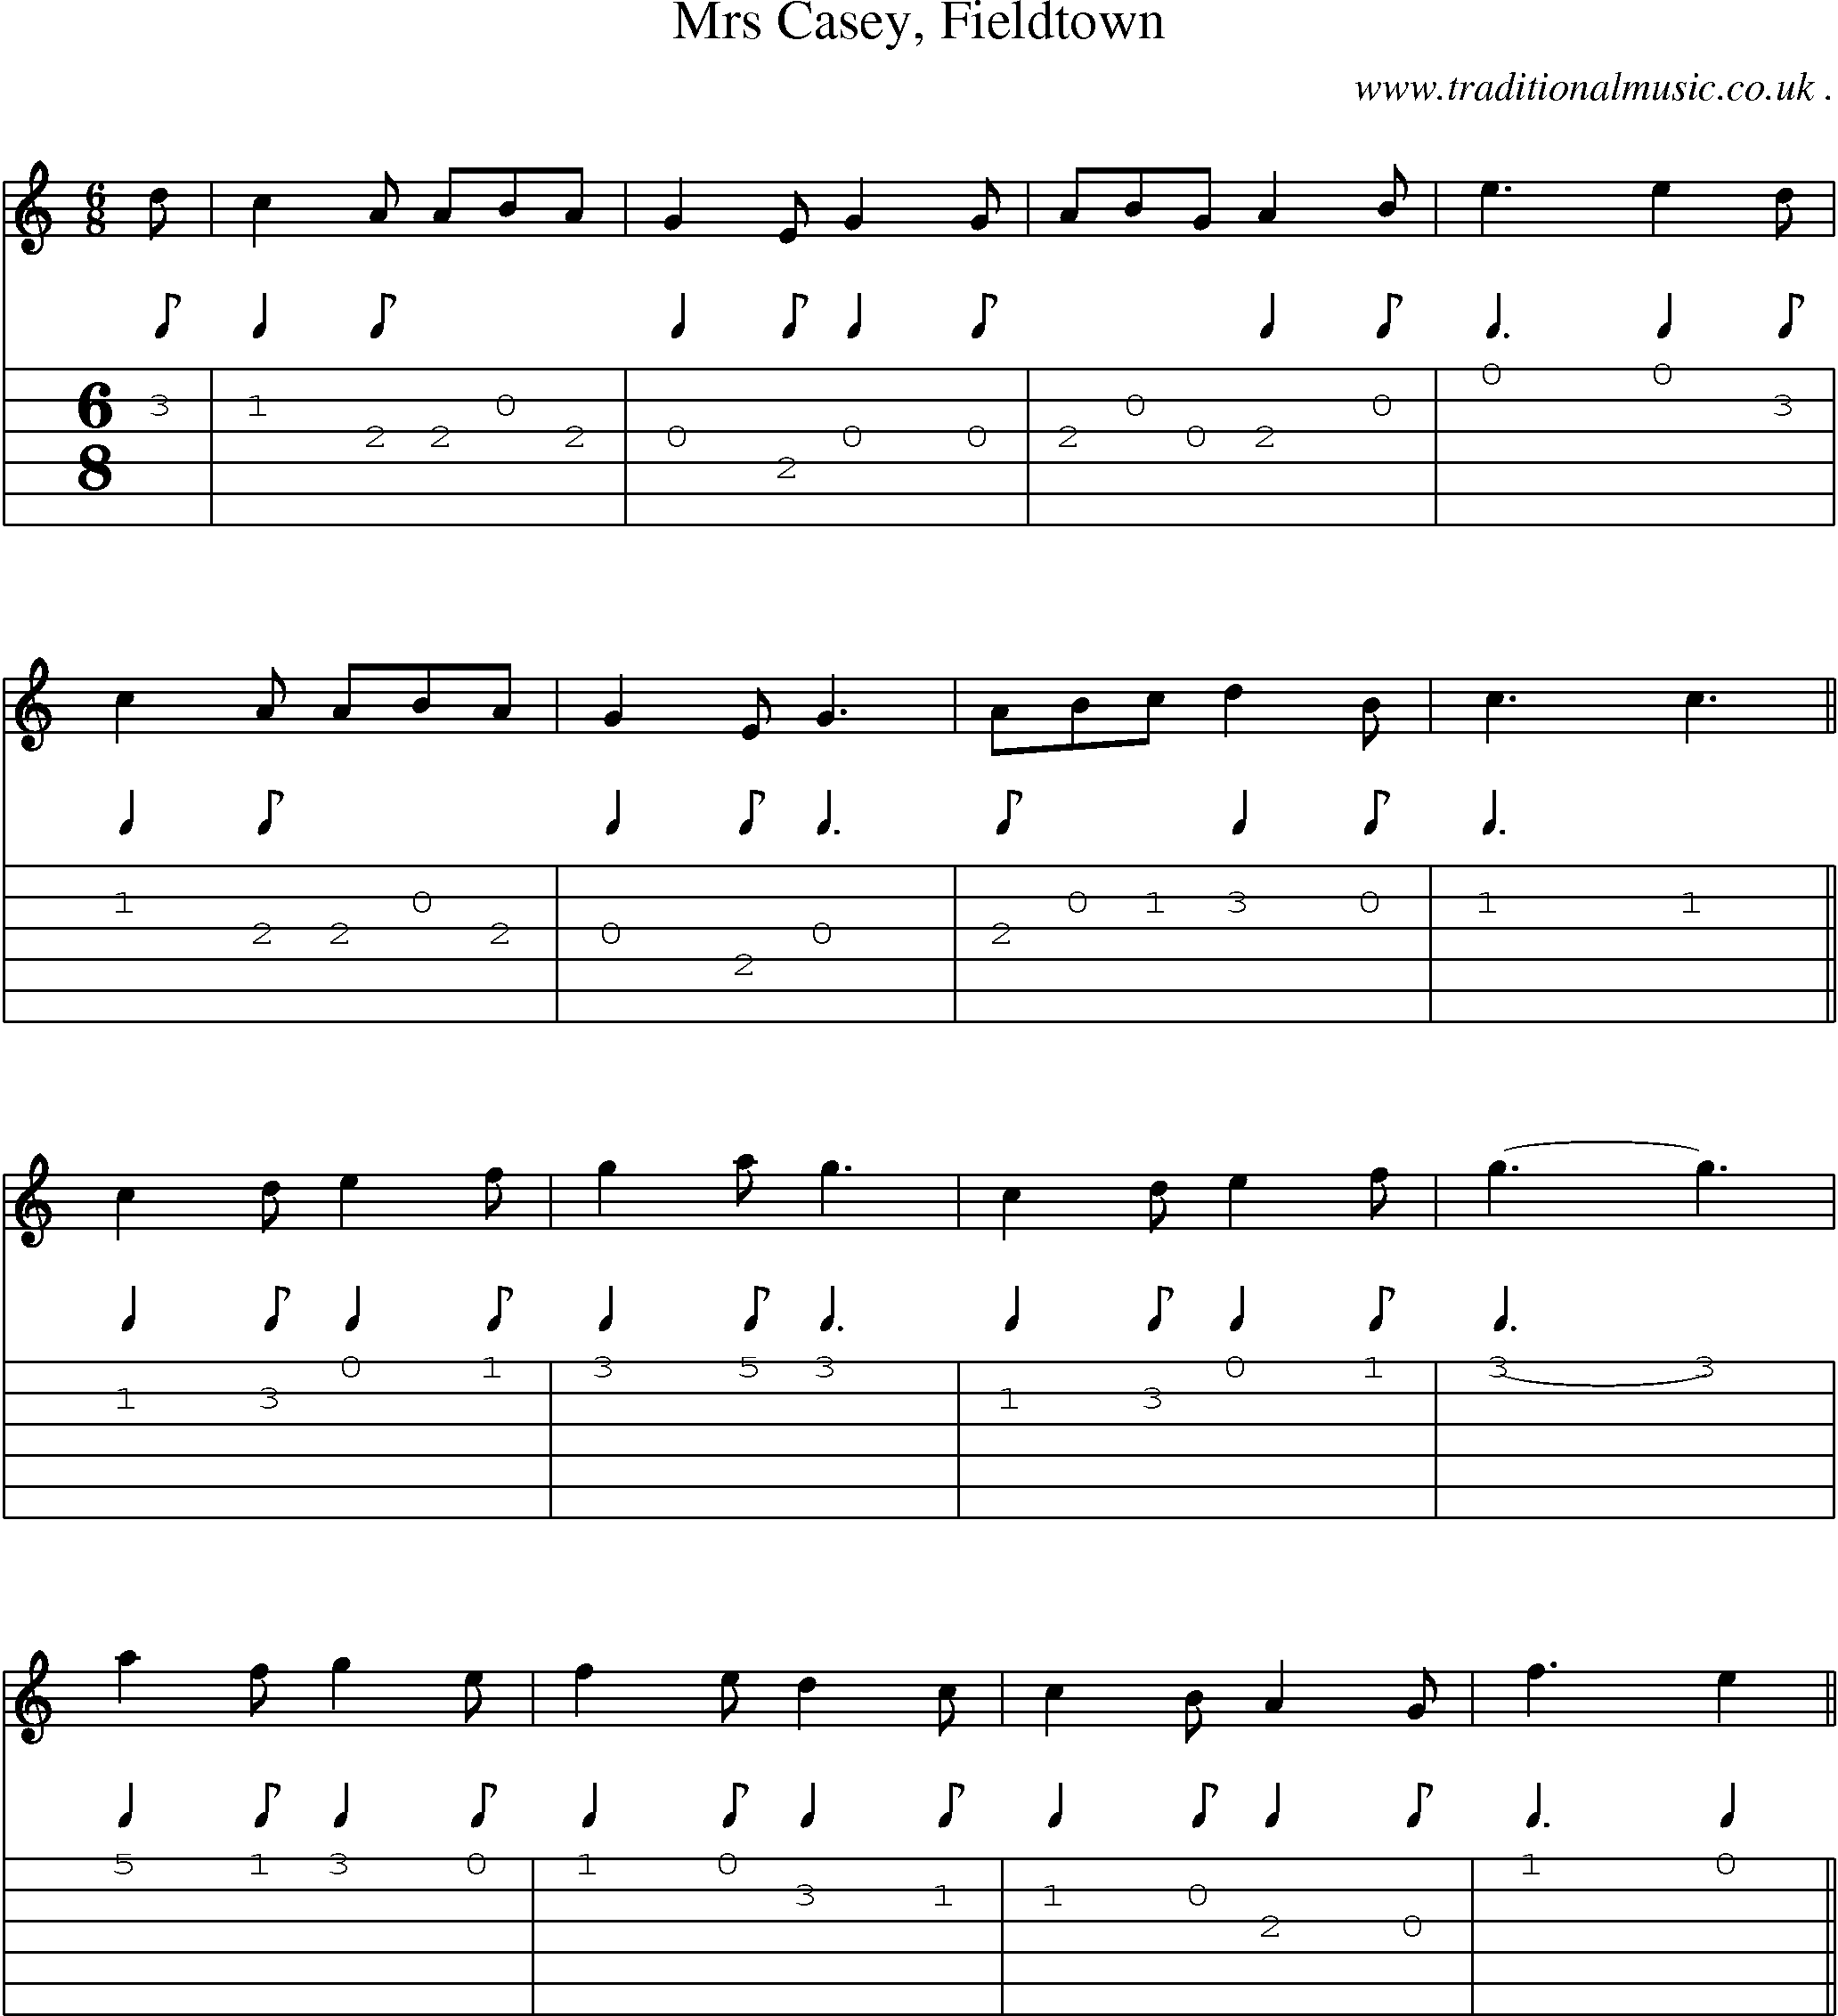 Sheet-Music and Guitar Tabs for Mrs Casey Fieldtown